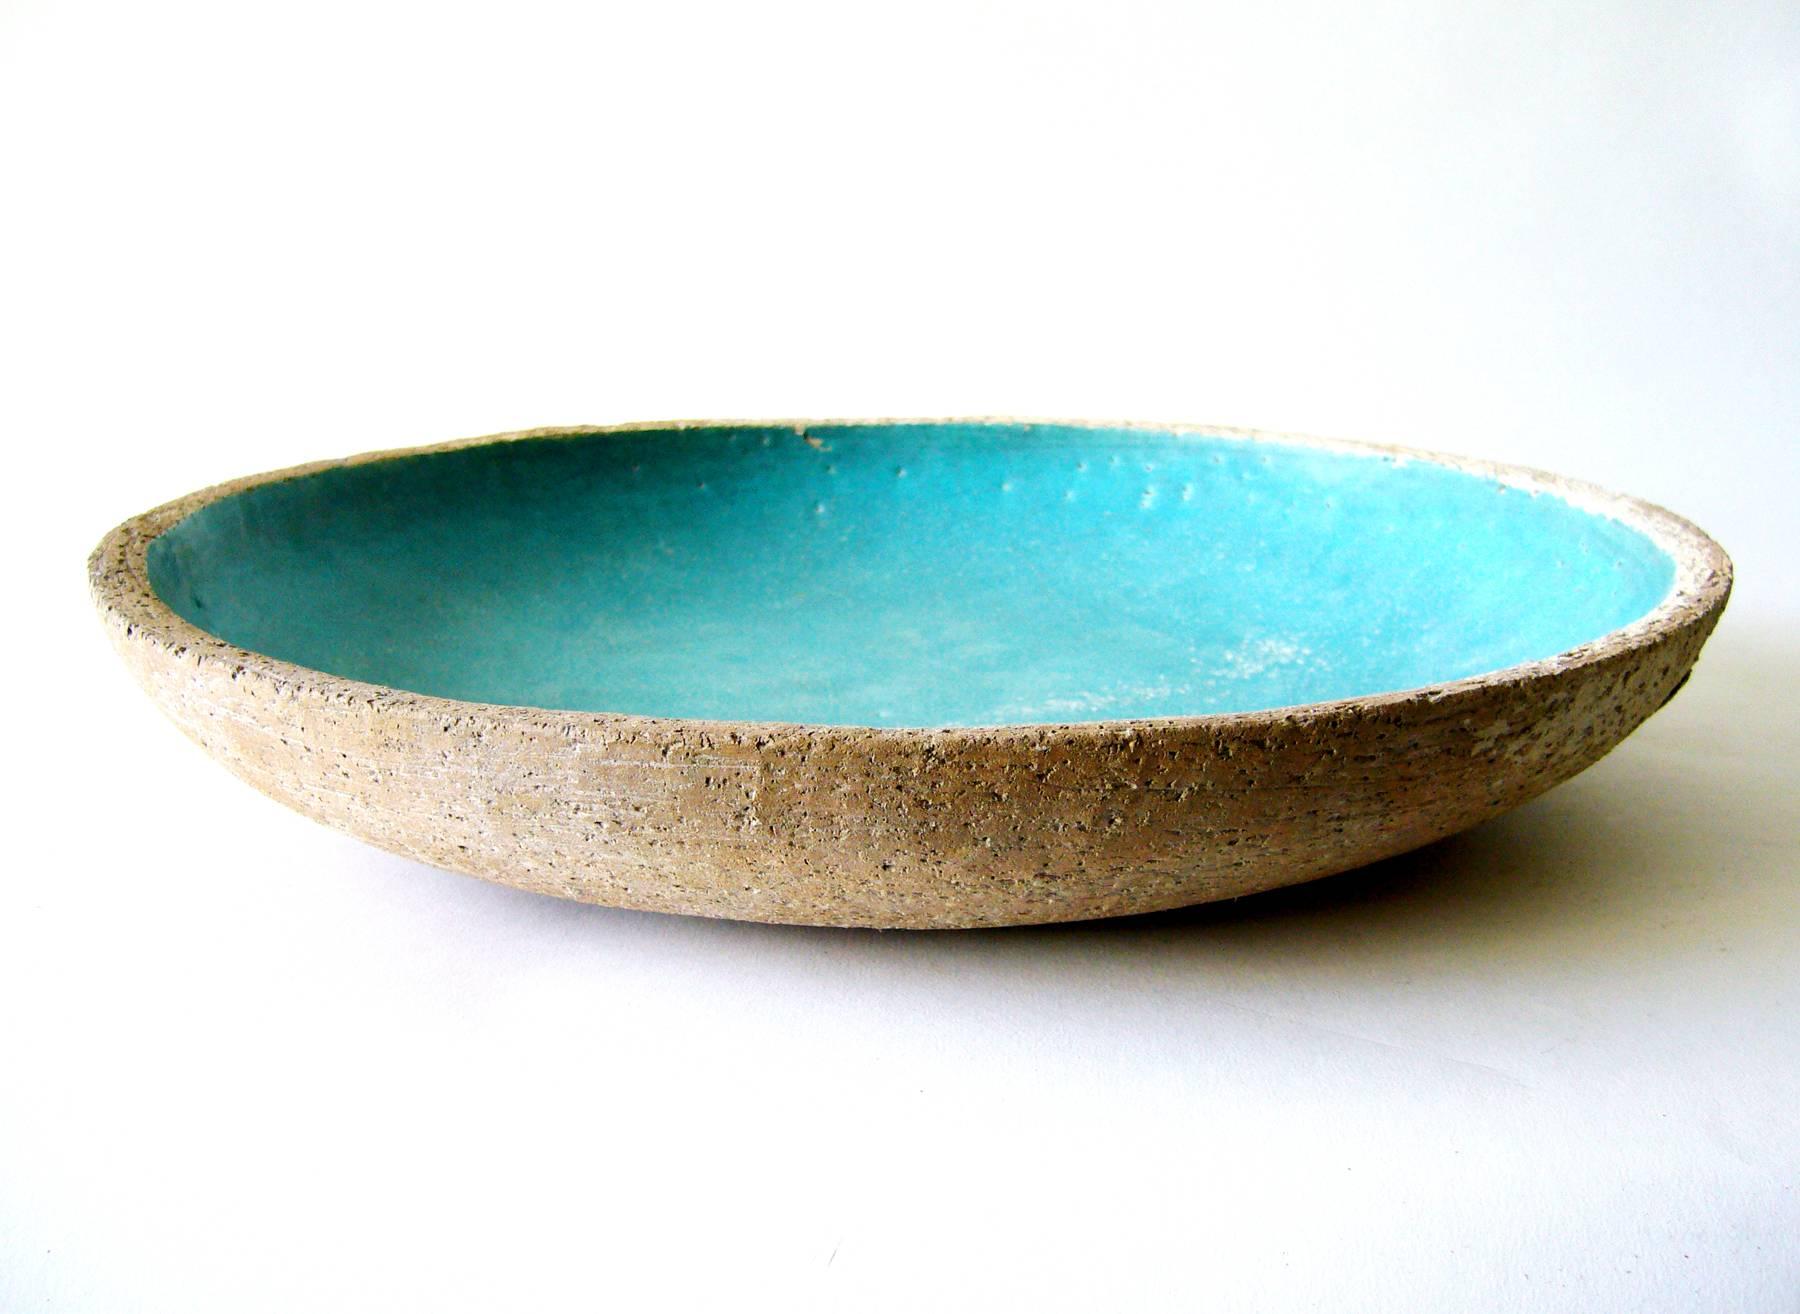 Large, open stoneware bisque bowl with turquoise blue glazed interior created by Barbara Willis of California. Willis studied with studio ceramist Laura Andreson at UCLA and was influenced by Glen Lukens of USC. Willis had a studio in Los Angeles